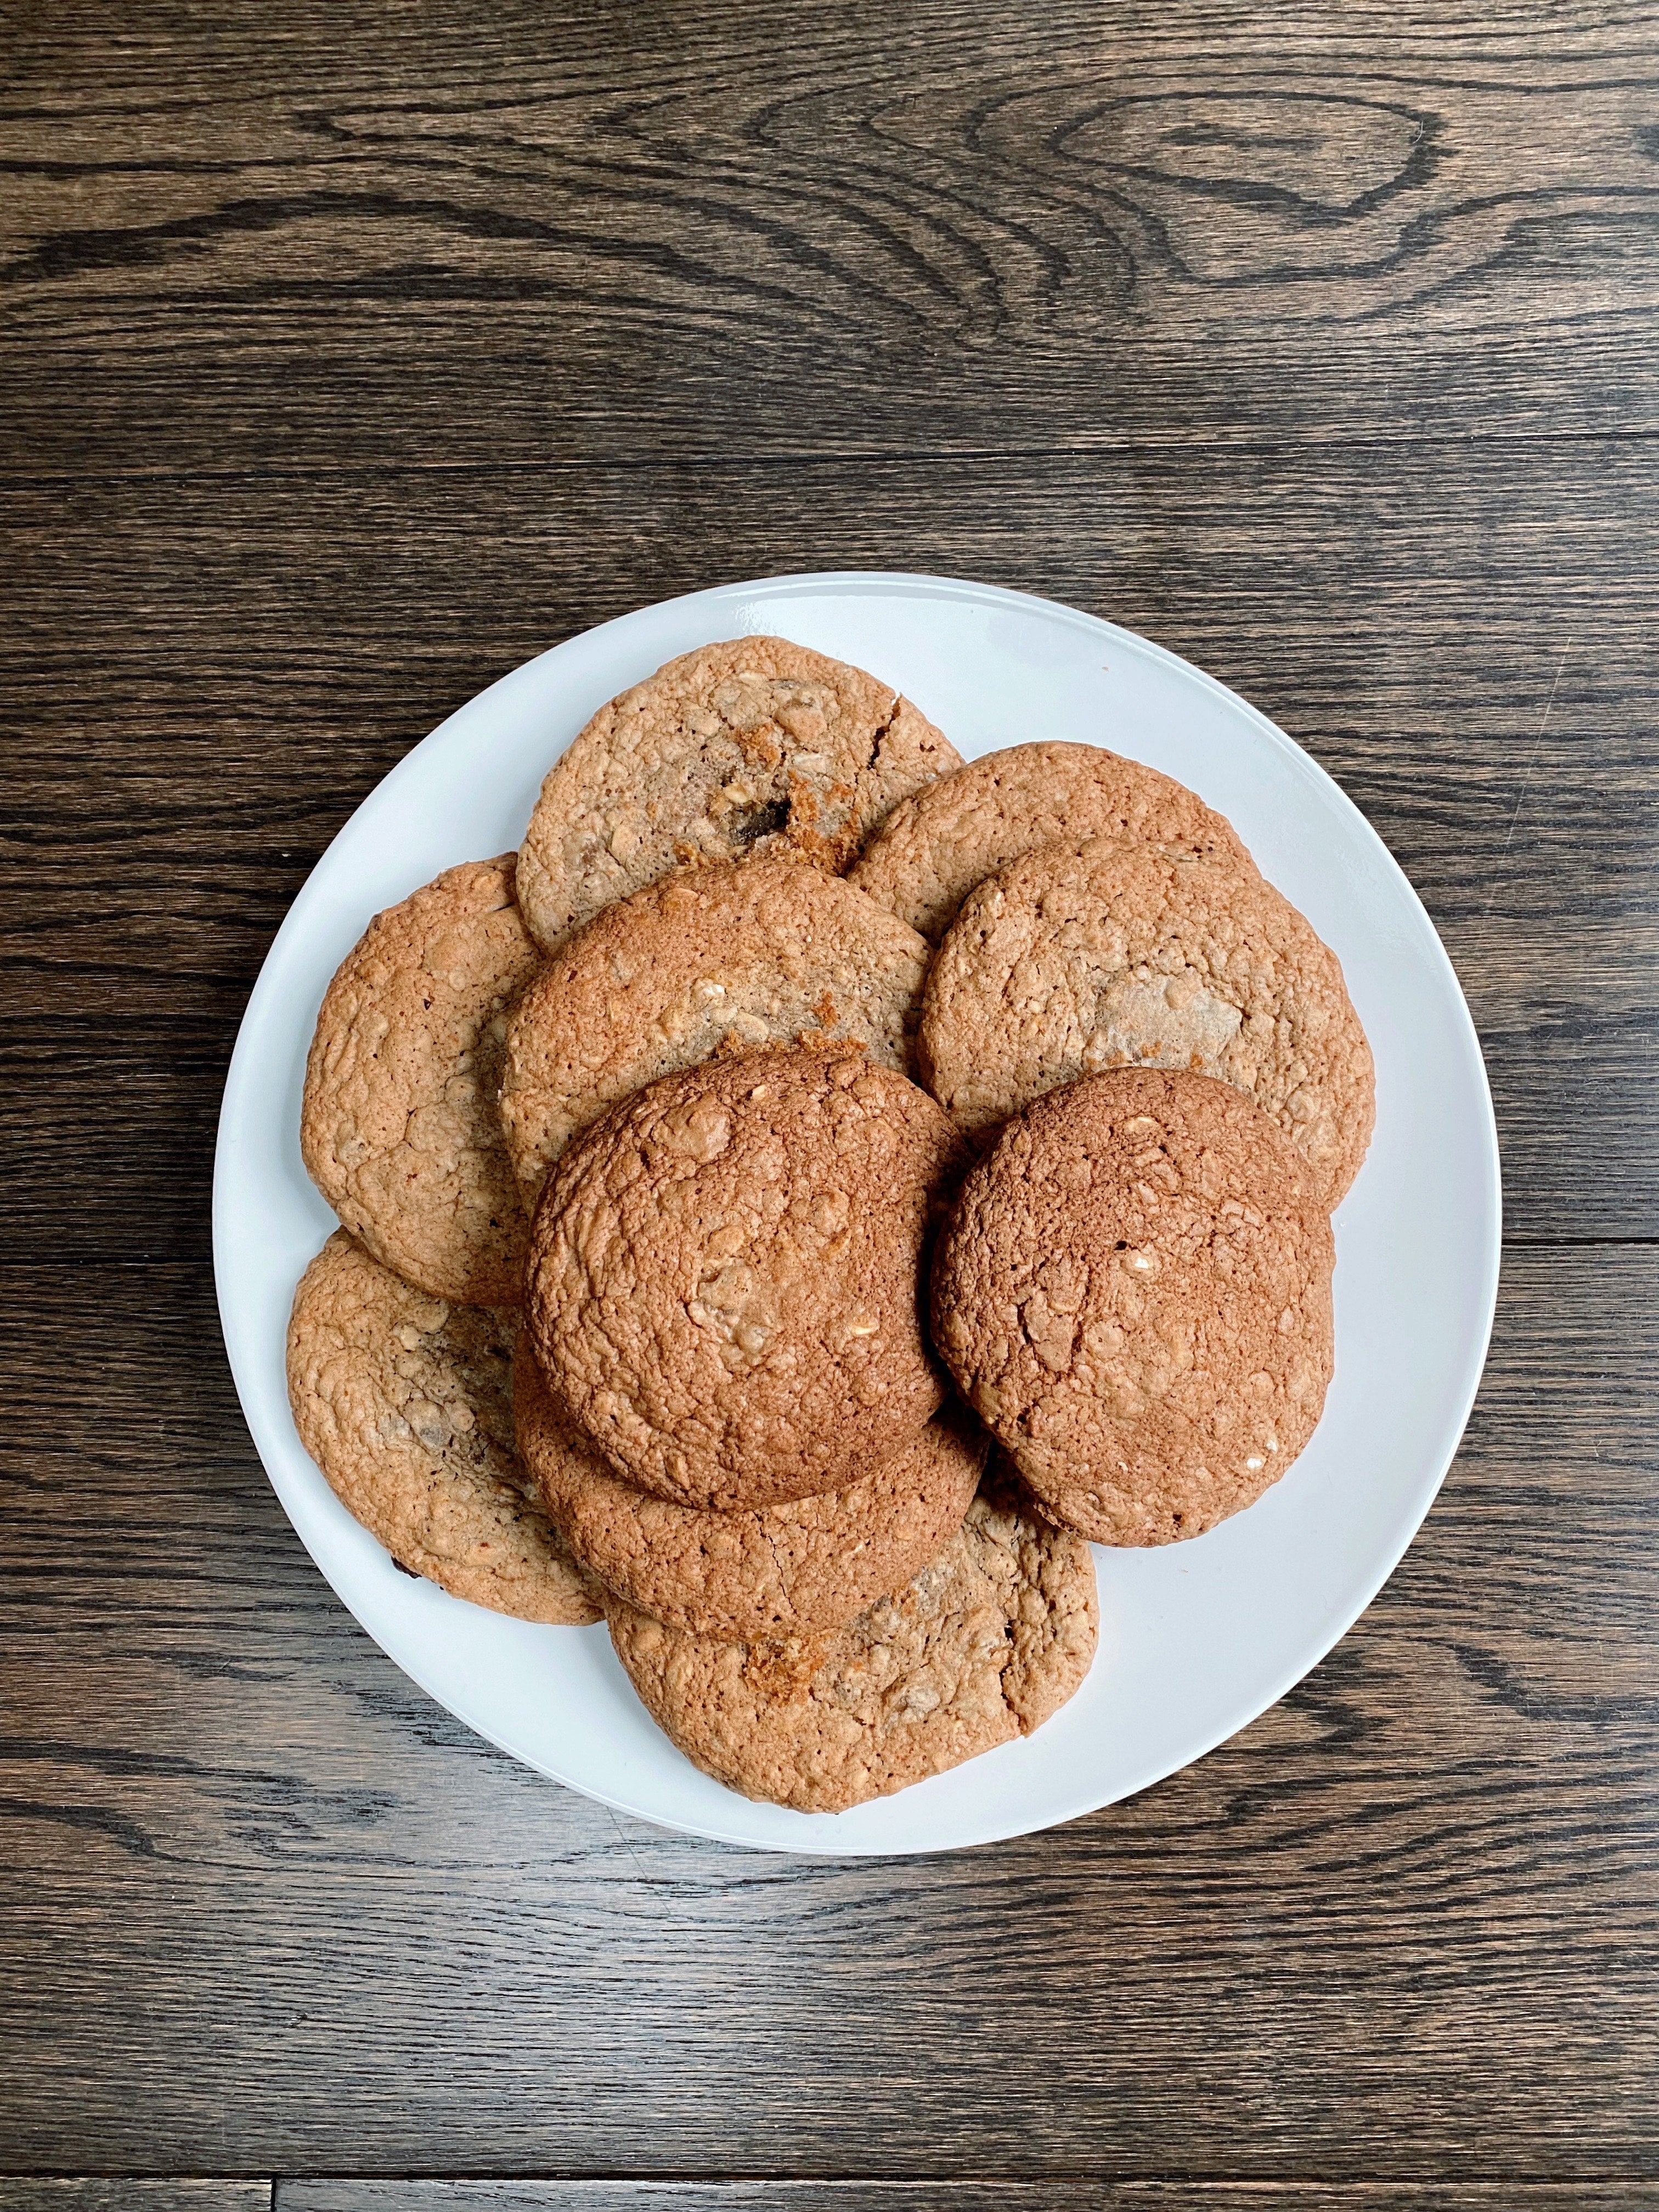 Ginger and chocolate cookie recipe